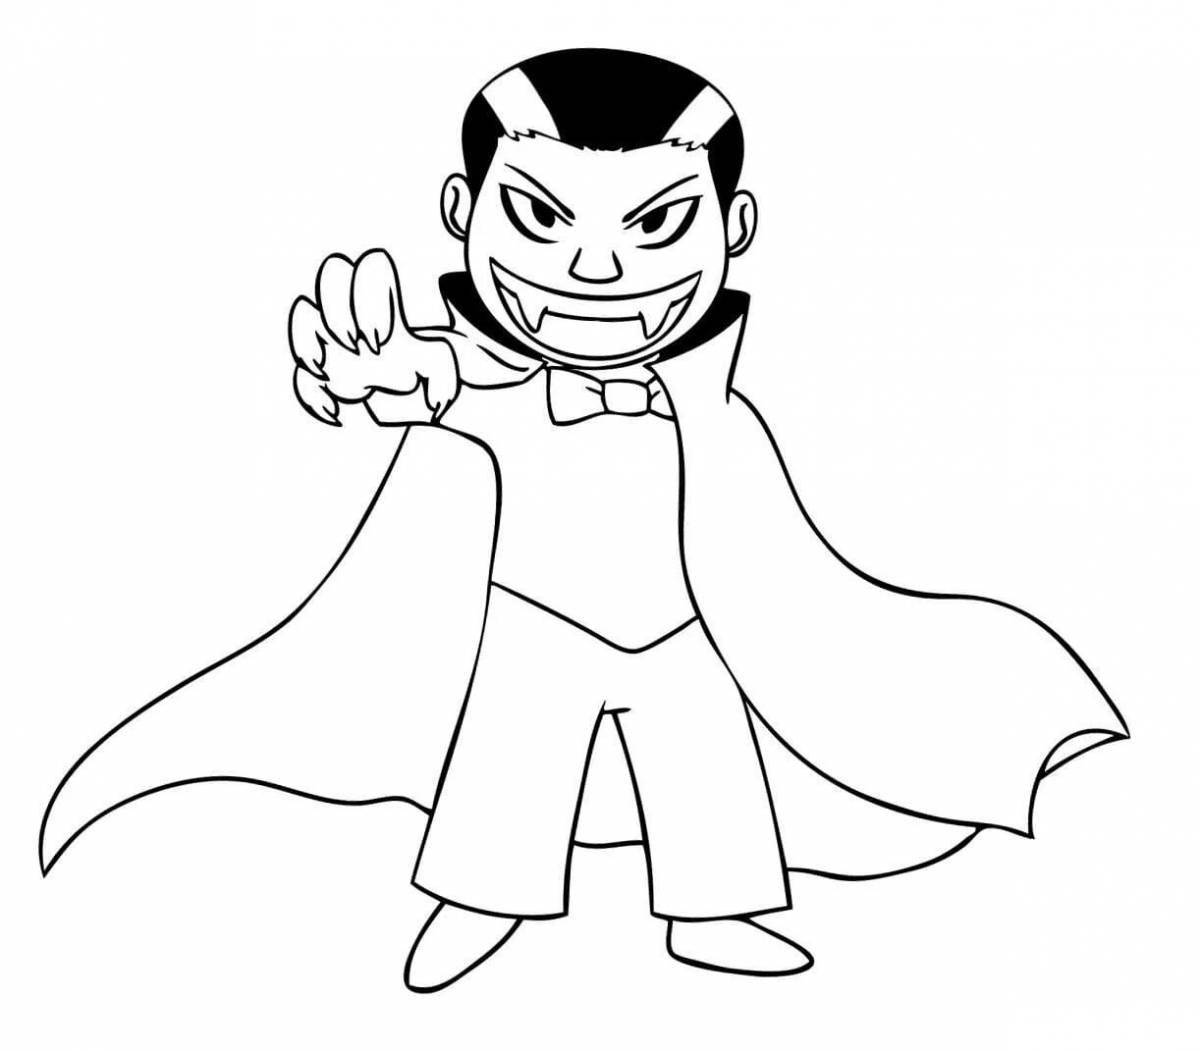 Coloring book unthinkable Count Dracula